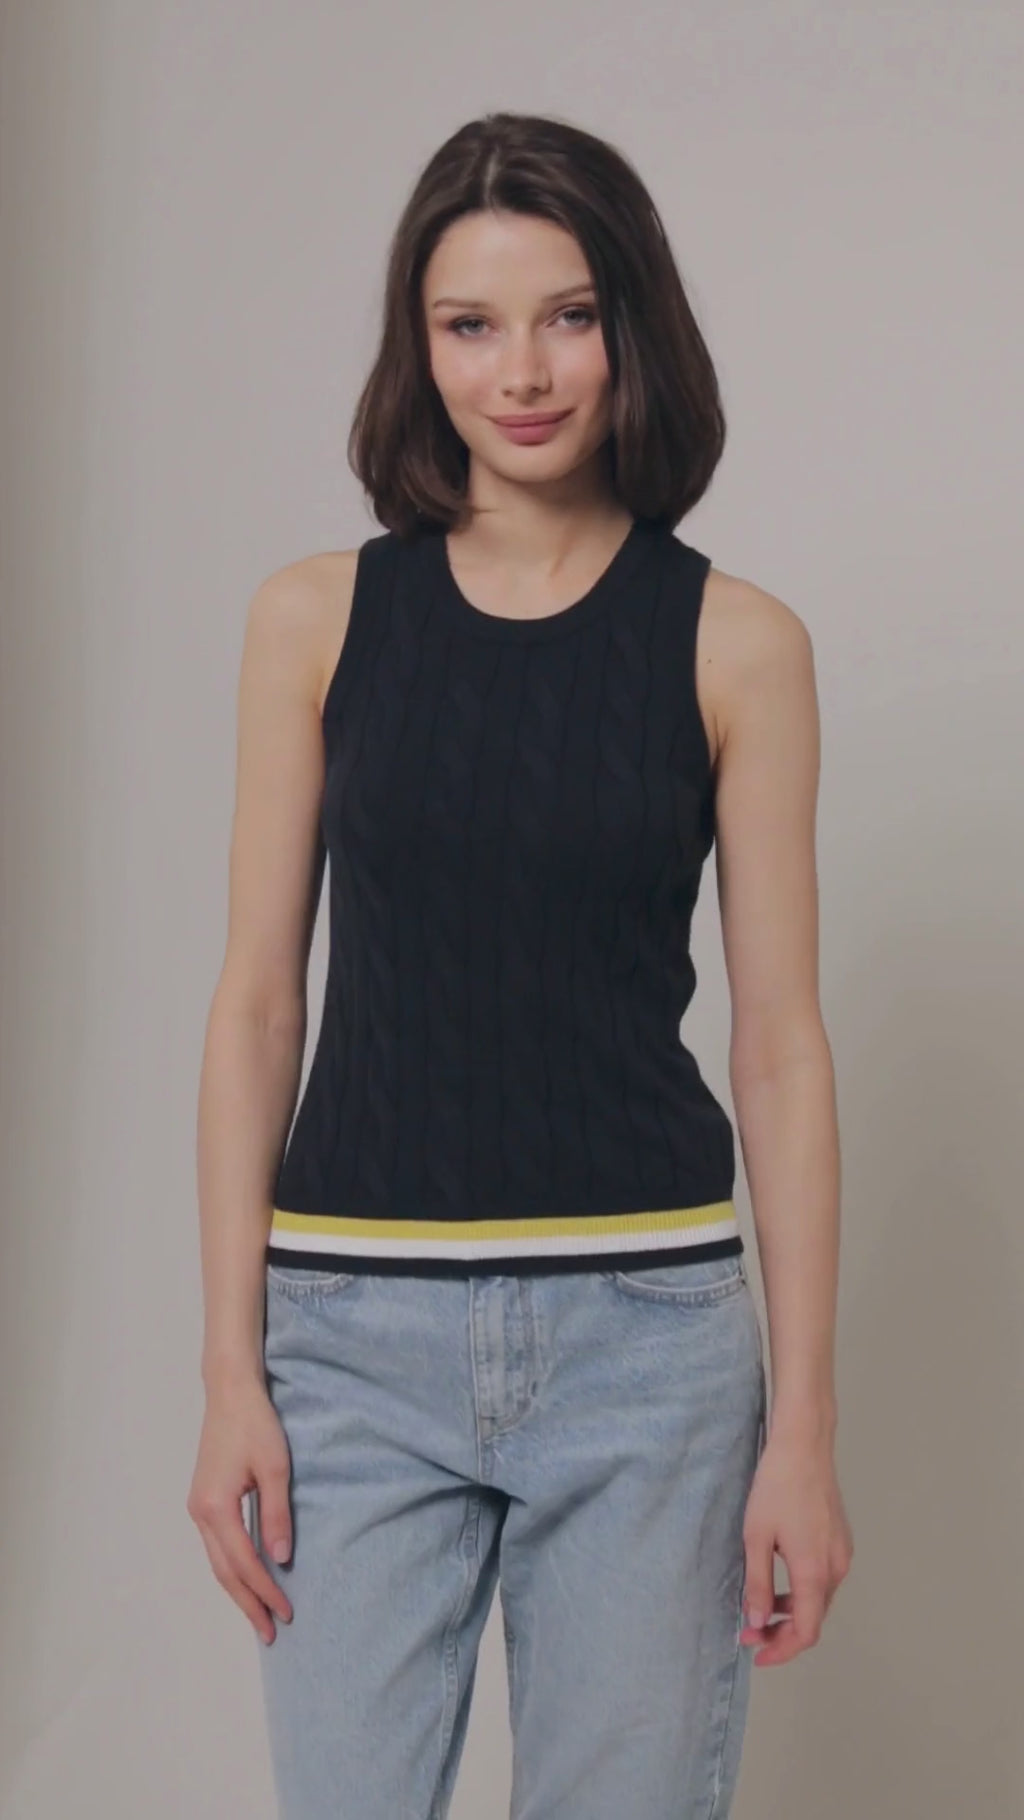 Video of model turning 360 degrees wearing navy cable knit sweater tank top with yellow, white and navy stripe detail on bottom hem